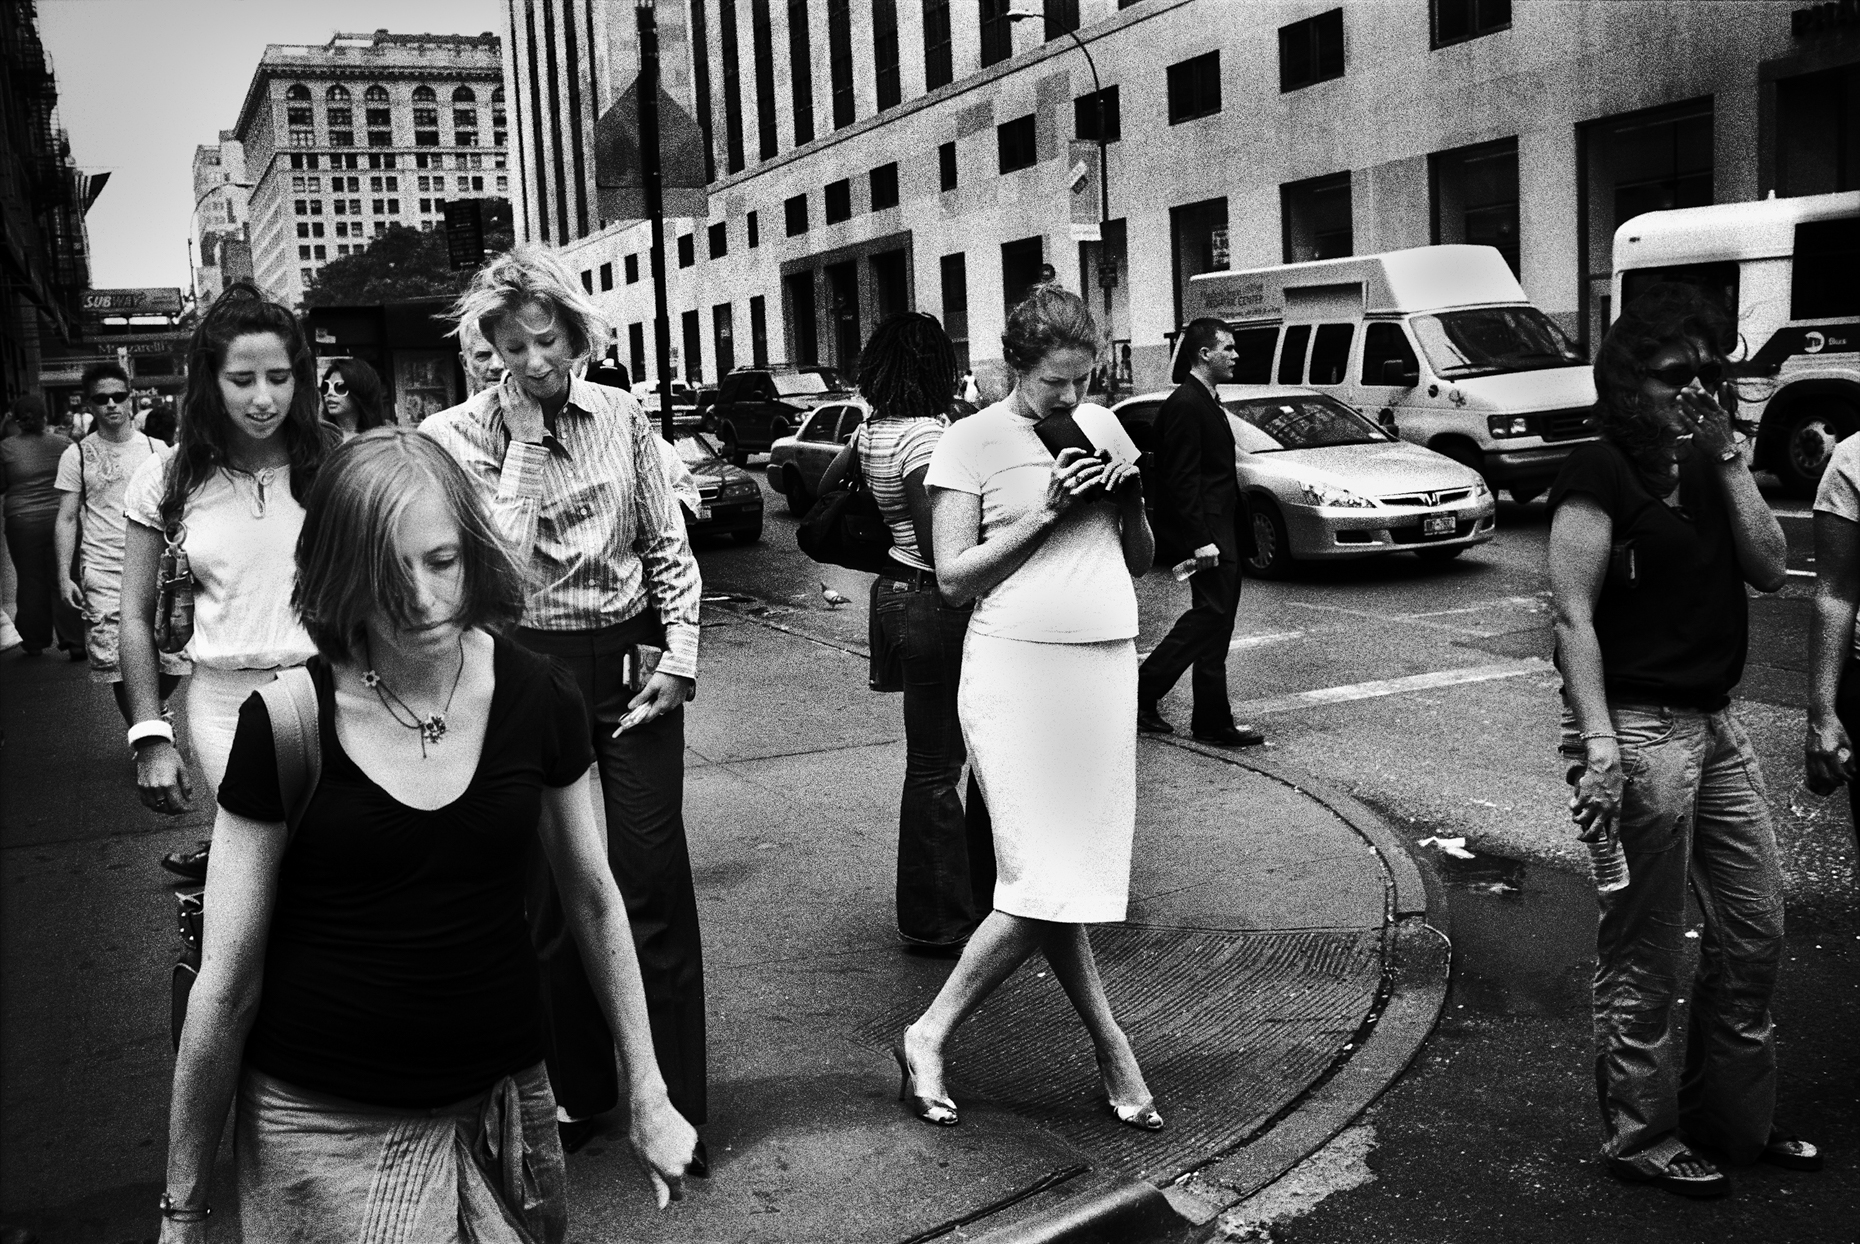 23rd St., & Park Ave., New York City, 2006 (from Dear New Yorker)